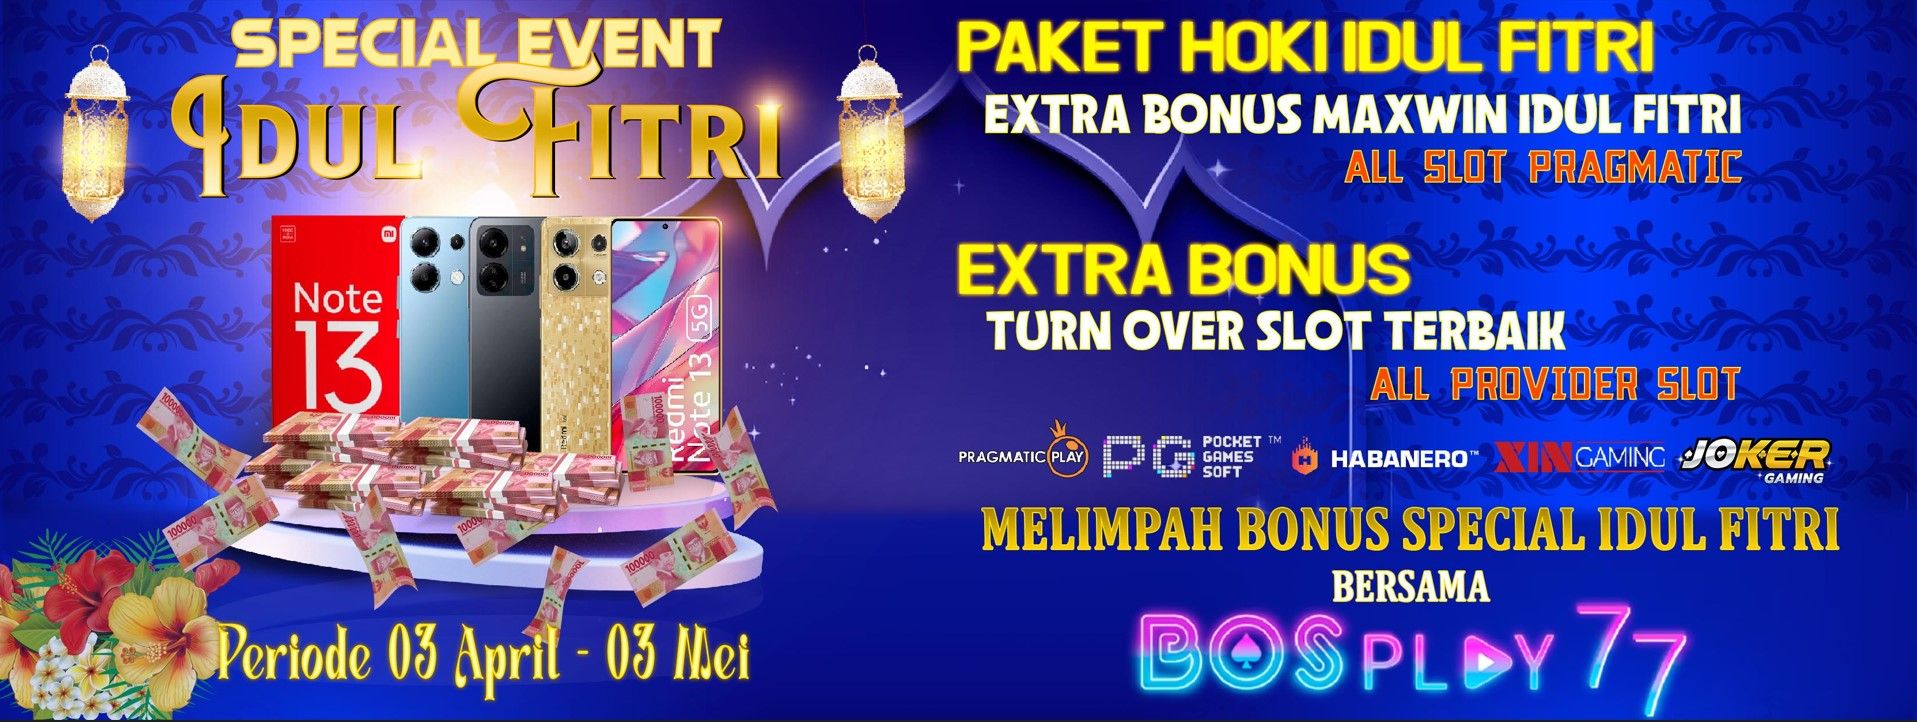 EVENT EXTRA MAXWIN & TOP TURN OVER BOSPLAY77 idul fitri